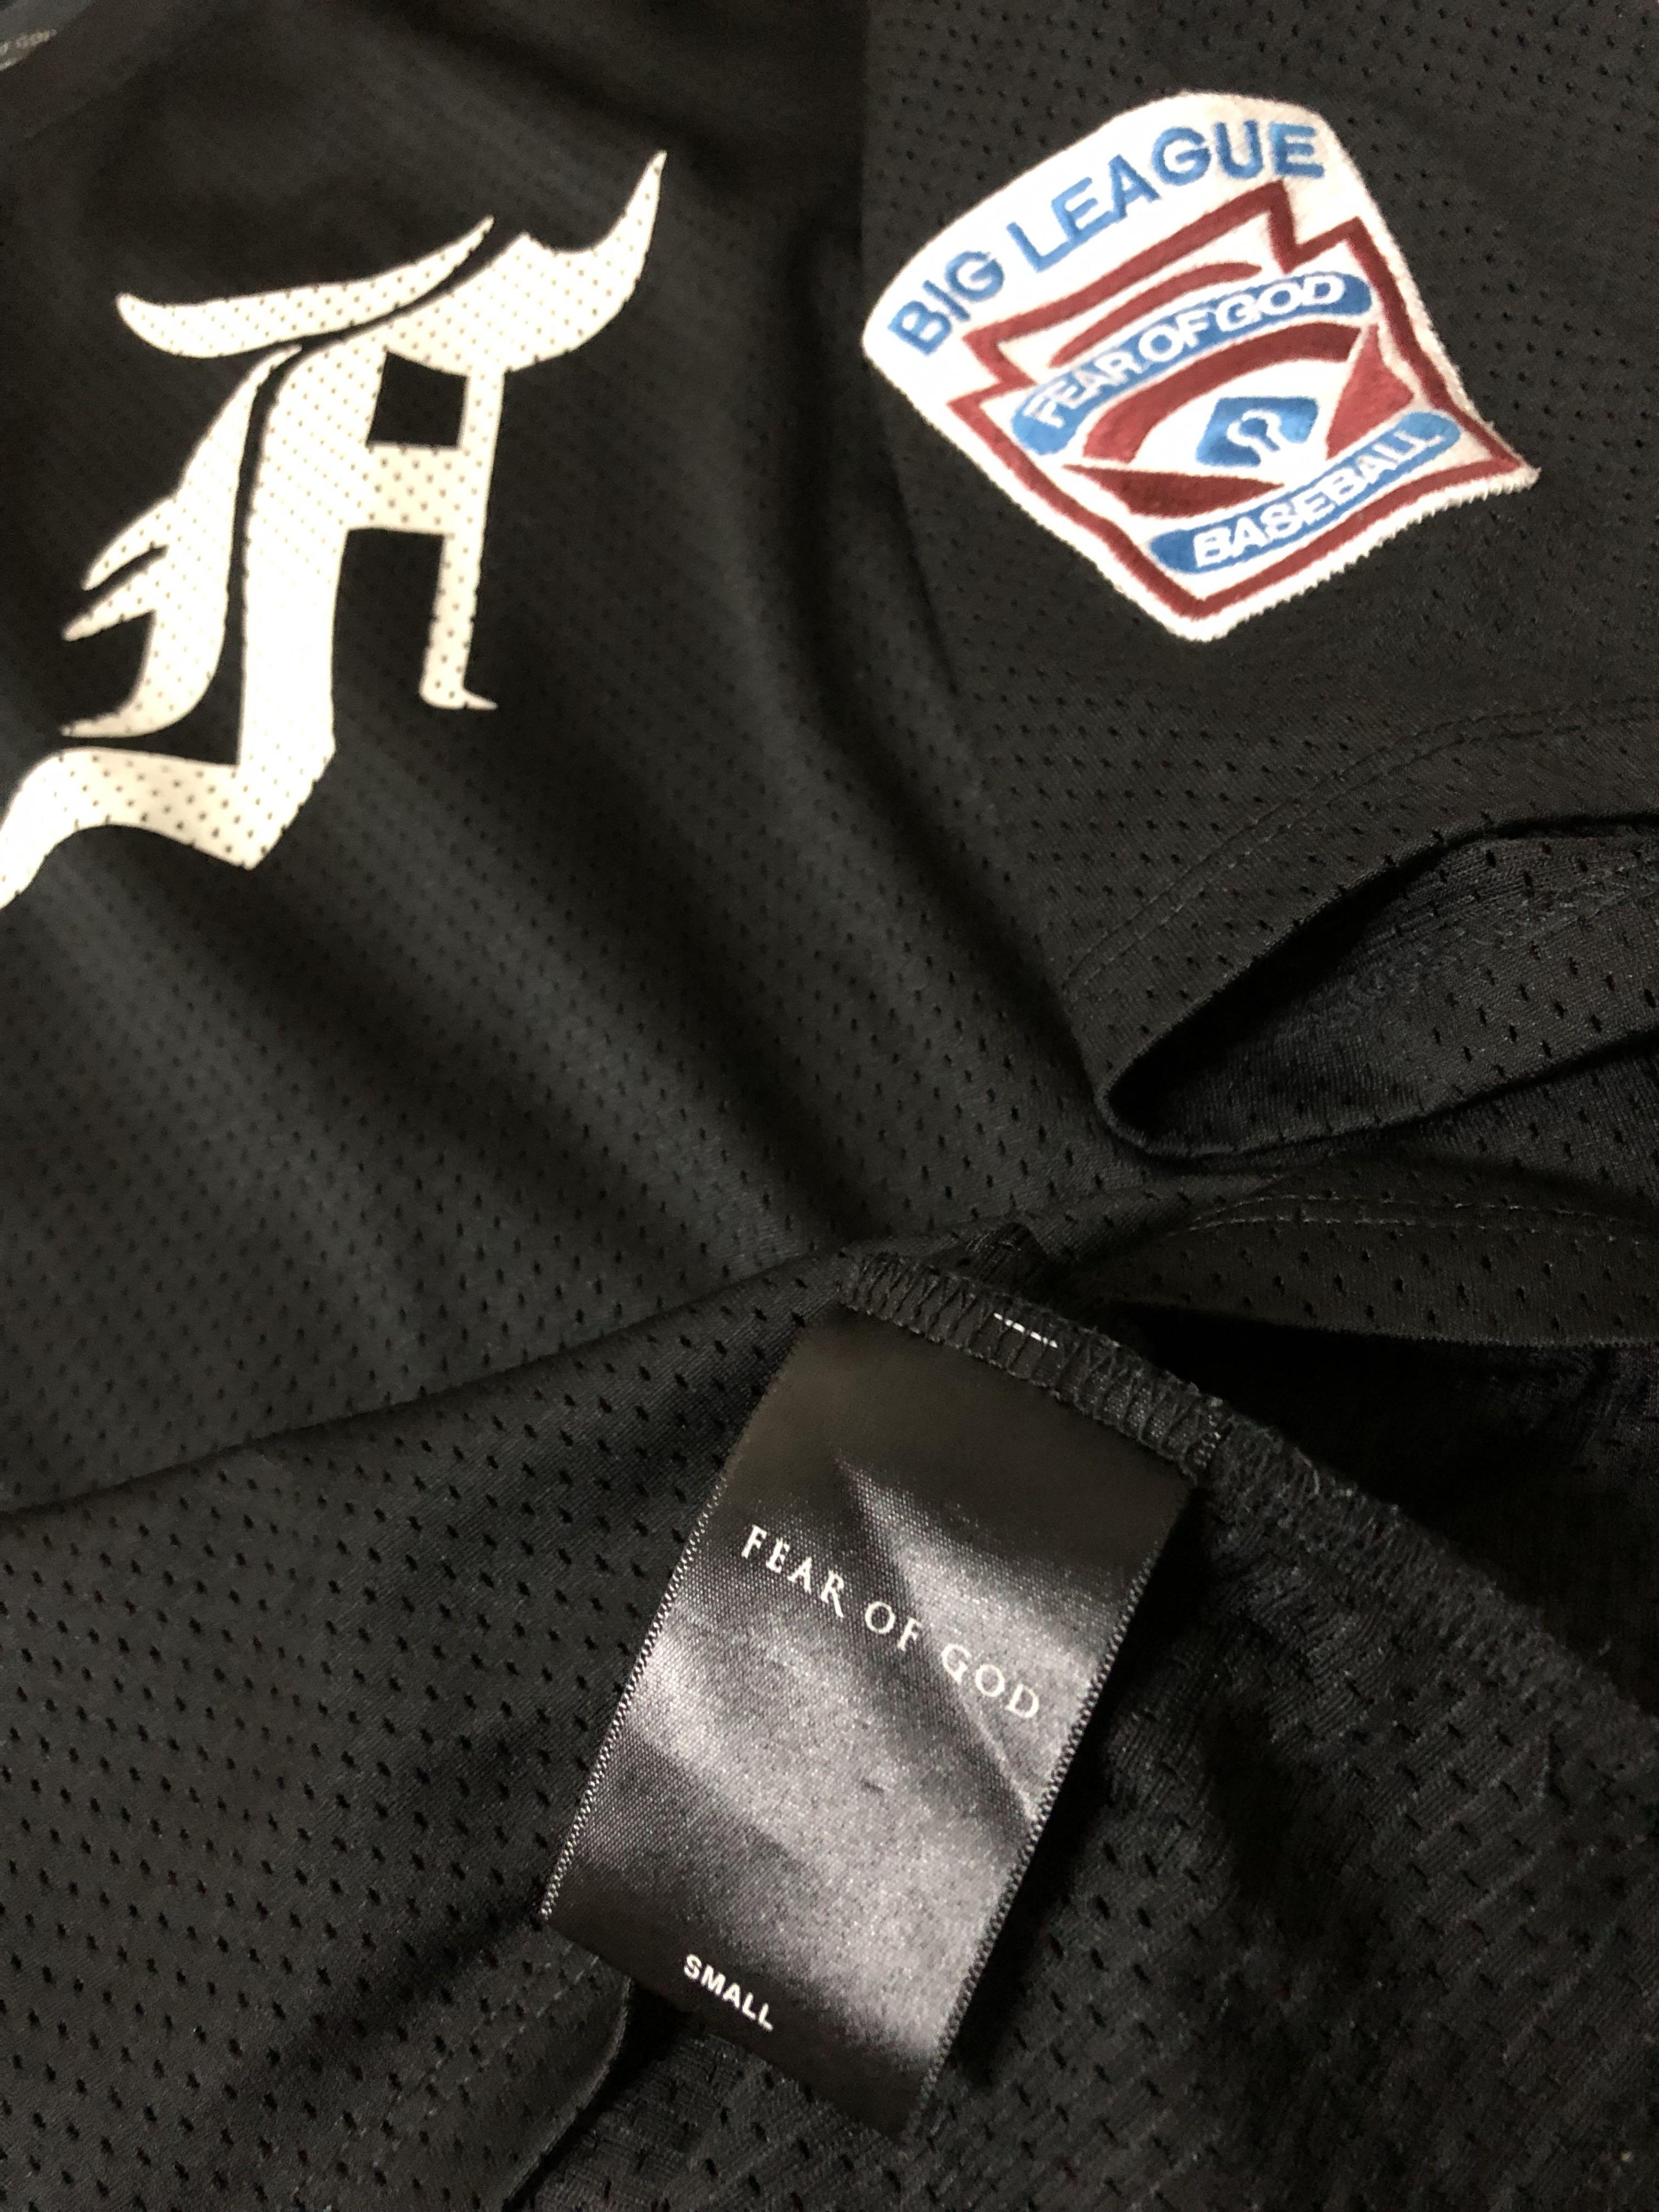 FEAR OF GOD 5th Mesh Batting Practice Jersey REVIEW (+Eng Sub